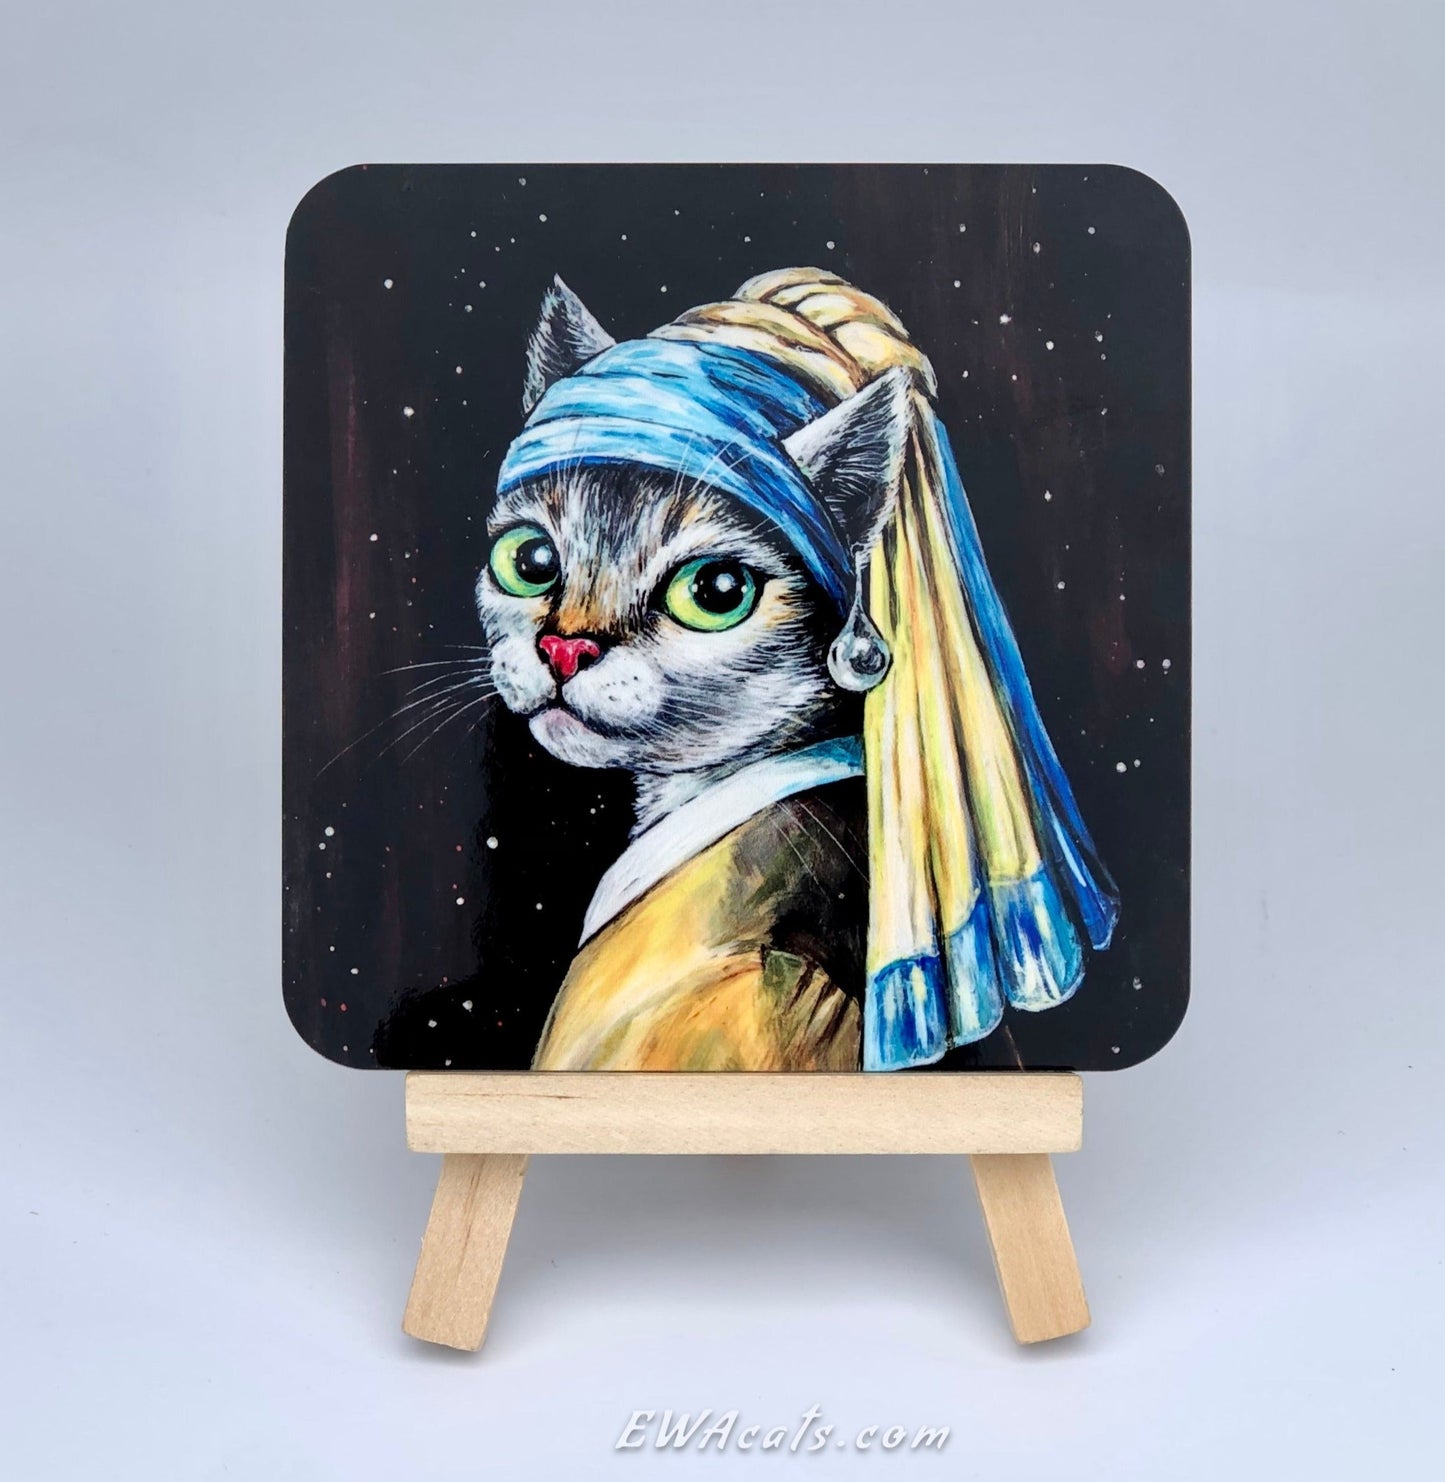 Coaster "Cat With a Pearl Earring"